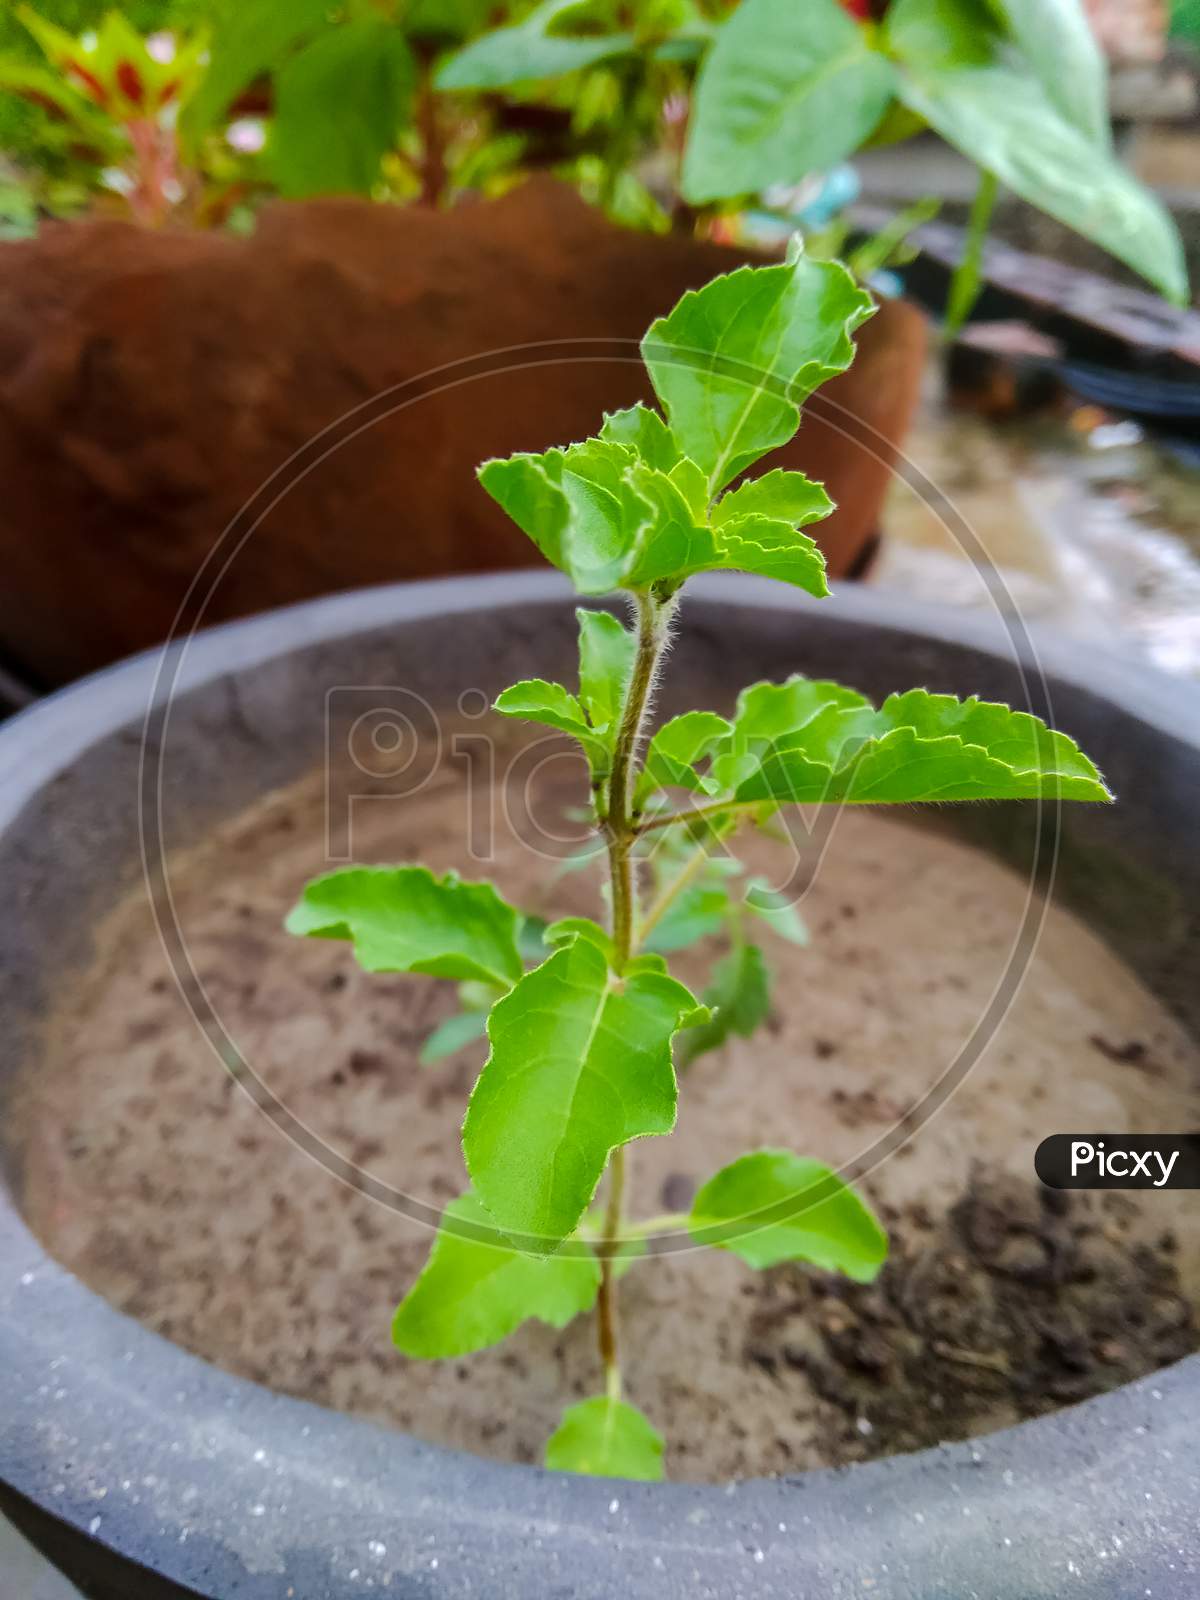 Tulsi also known as holy basil is a medicinal herb used in Ayurveda